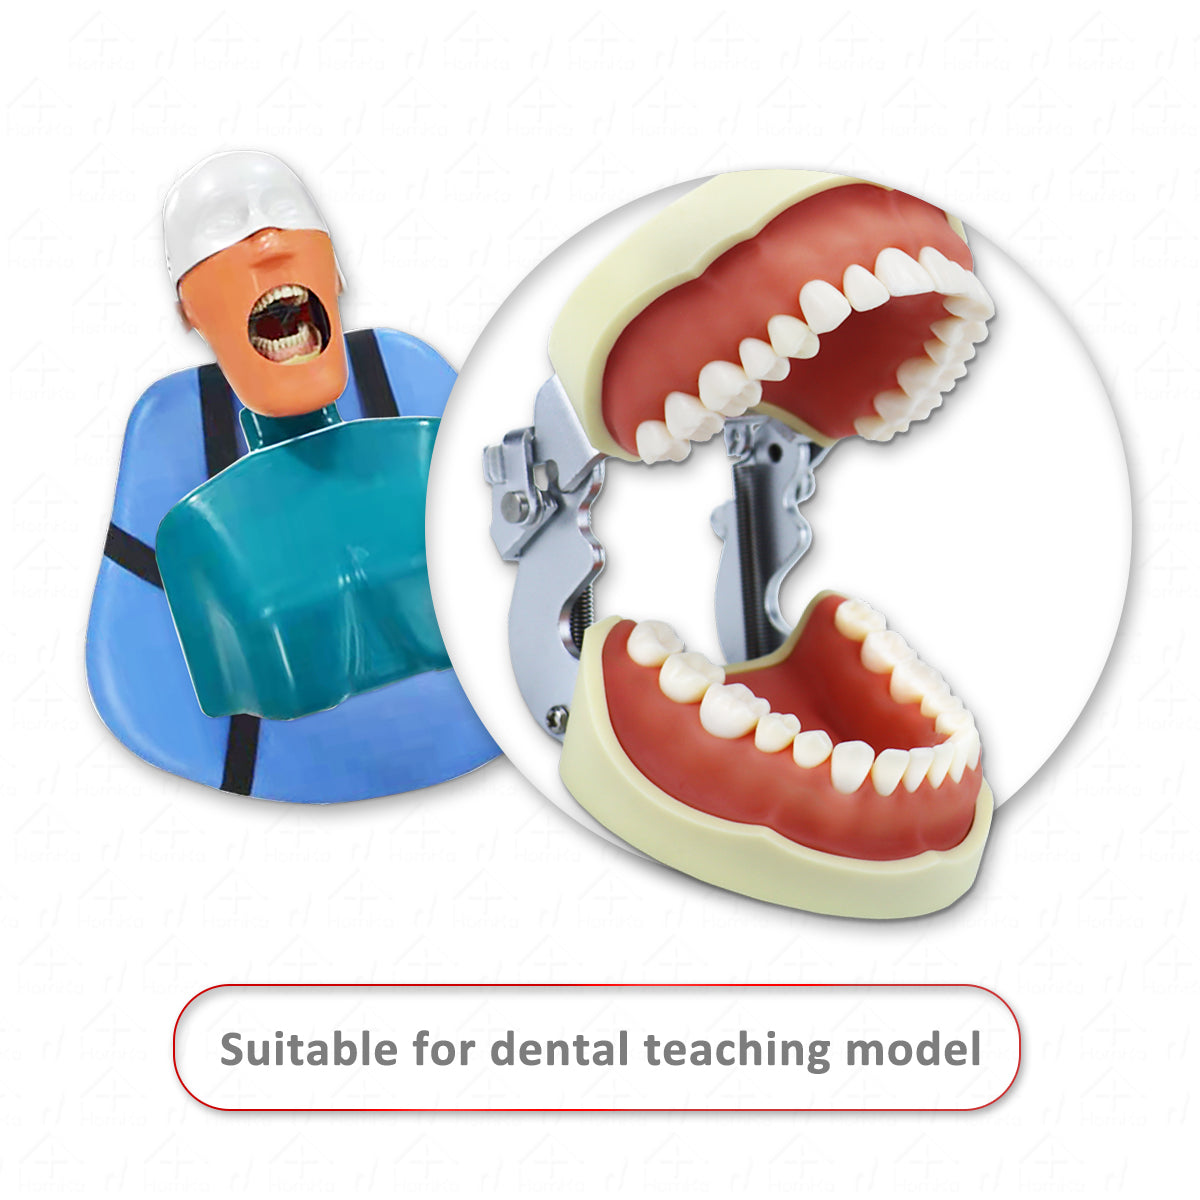 D-PP32 Removable Dental Model Tooth Arrangement Practice Model With 32 pcs Dental Granule and Screw Teaching Simulation